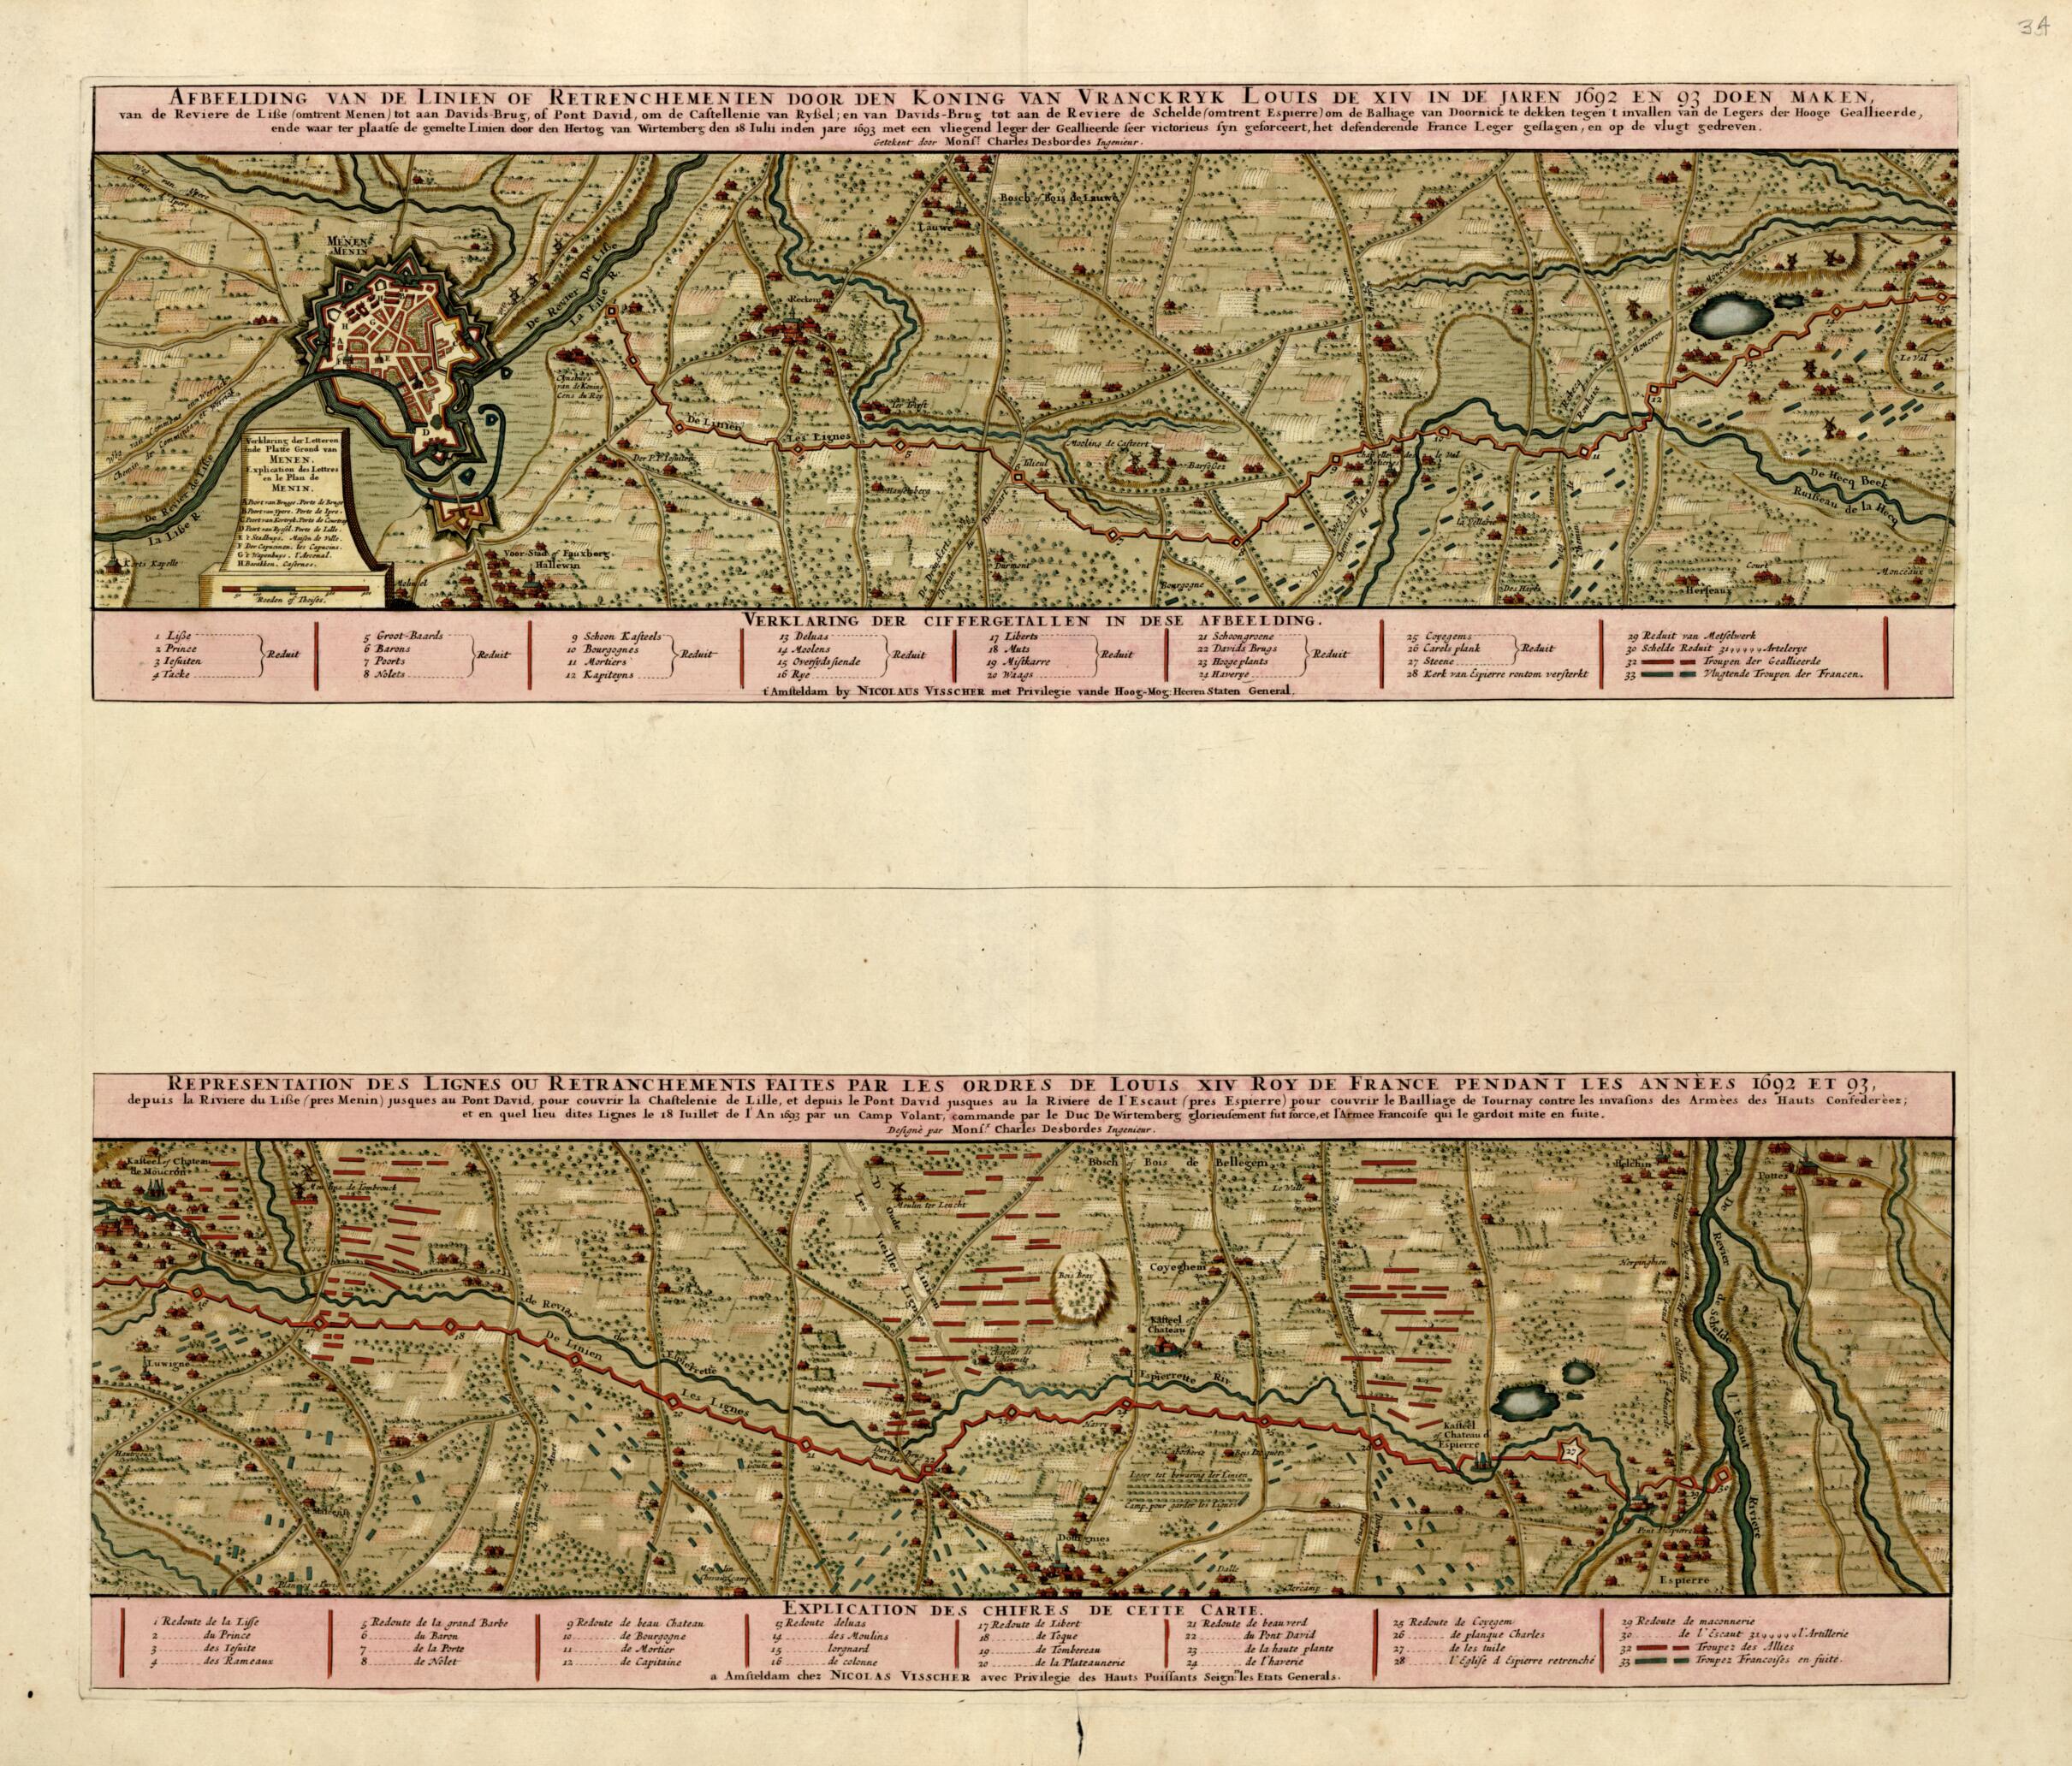 This old map of Afbeelding Van De Linien of Retrenchementen; Representation Des Lignes from a Collection of Plans of Fortifications and Battles, 1684-from 1709 from 1709 was created by Anna Beeck in 1709